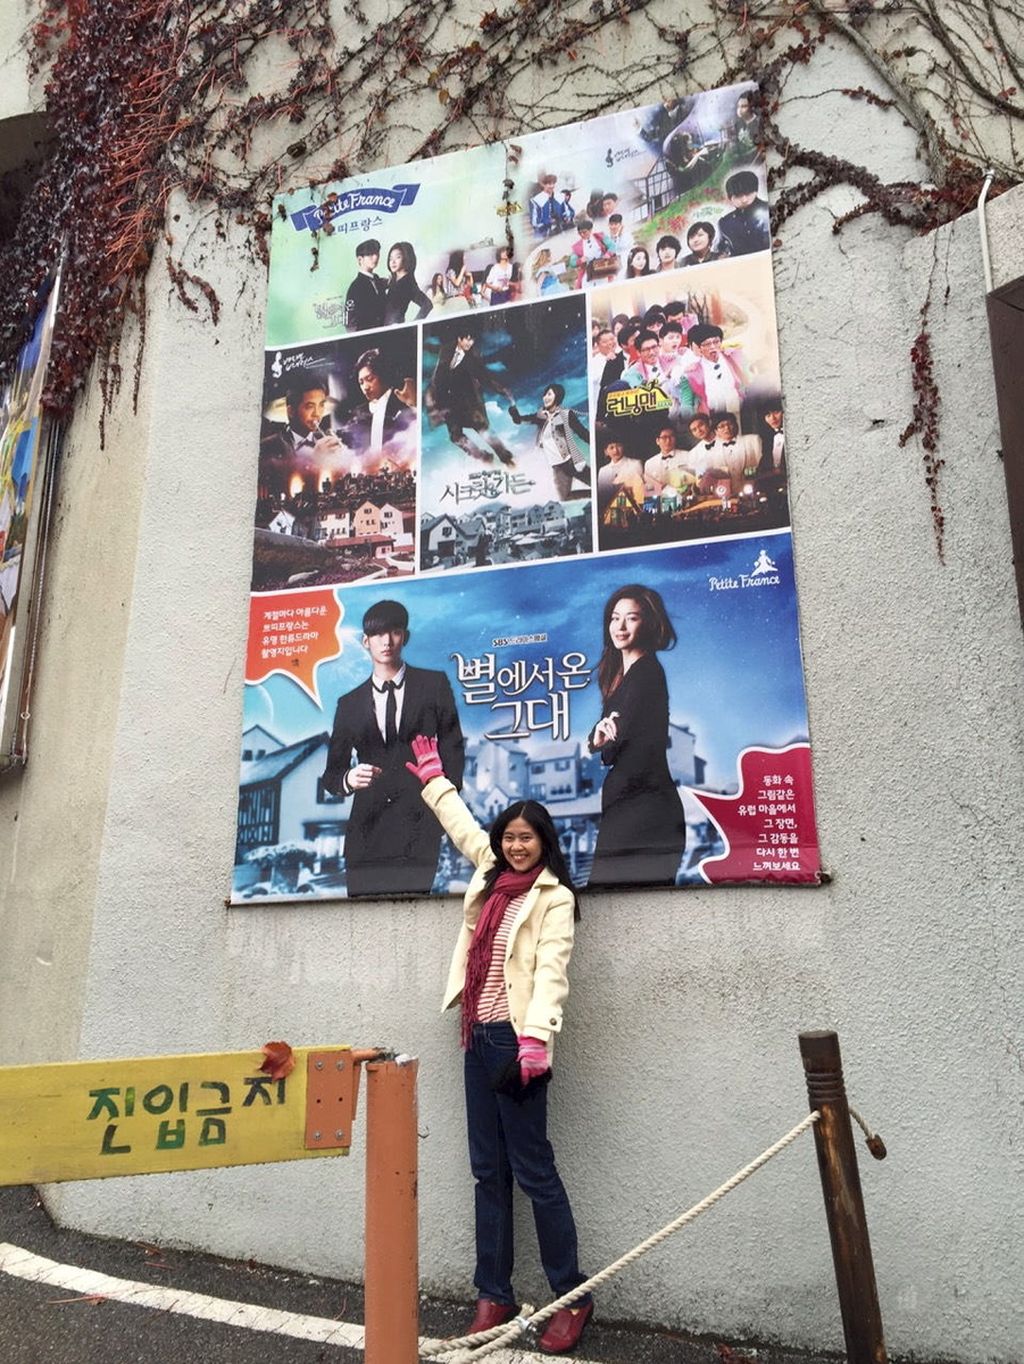 Korean drama lover, Erry Andriyati, visited Petite France and posed in front of a poster of Do Min Joon, the name of the character in the drama <i>My Love from The Star</i>.